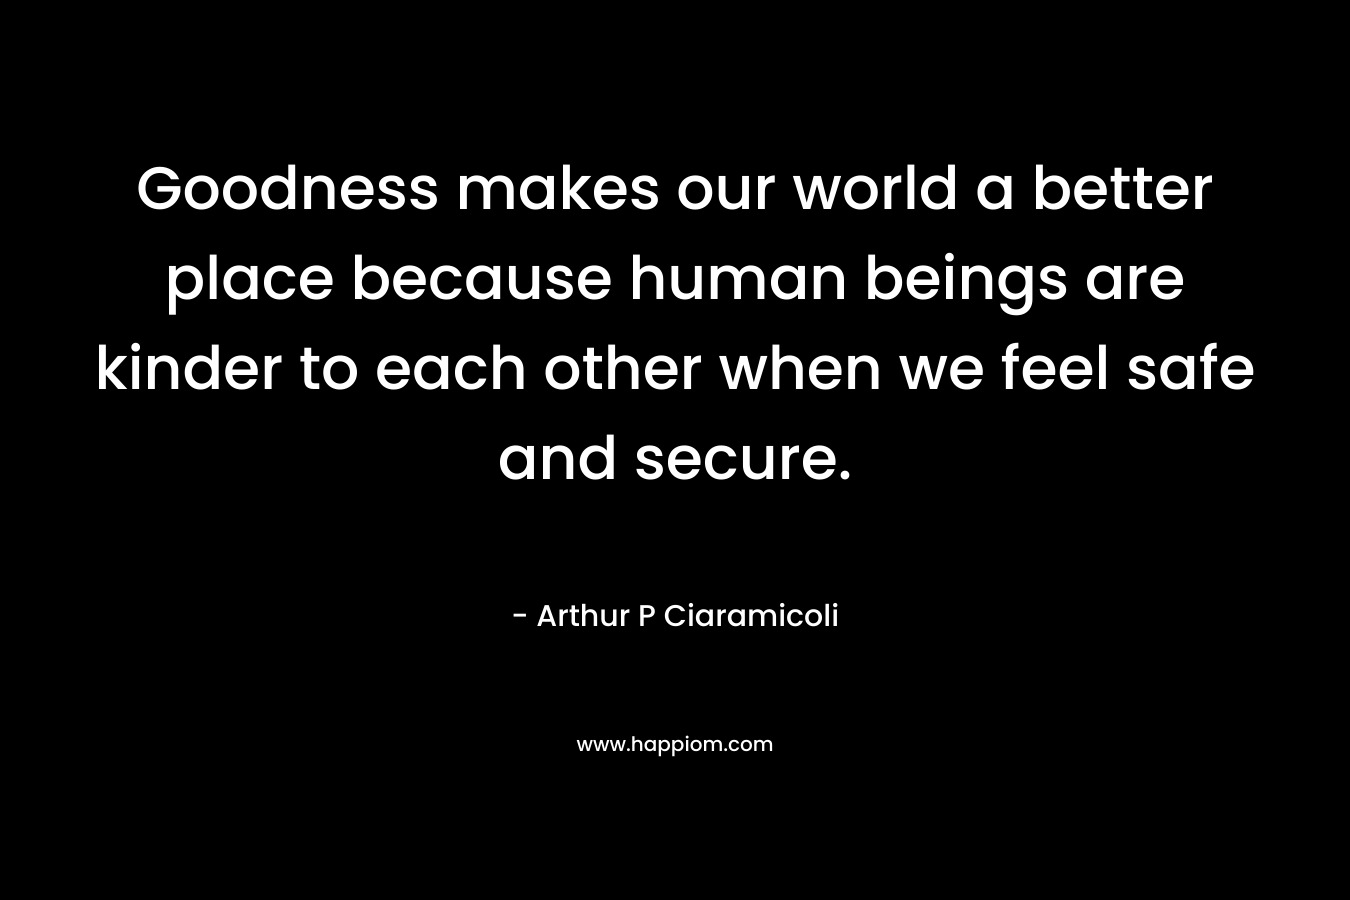 Goodness makes our world a better place because human beings are kinder to each other when we feel safe and secure. – Arthur P Ciaramicoli